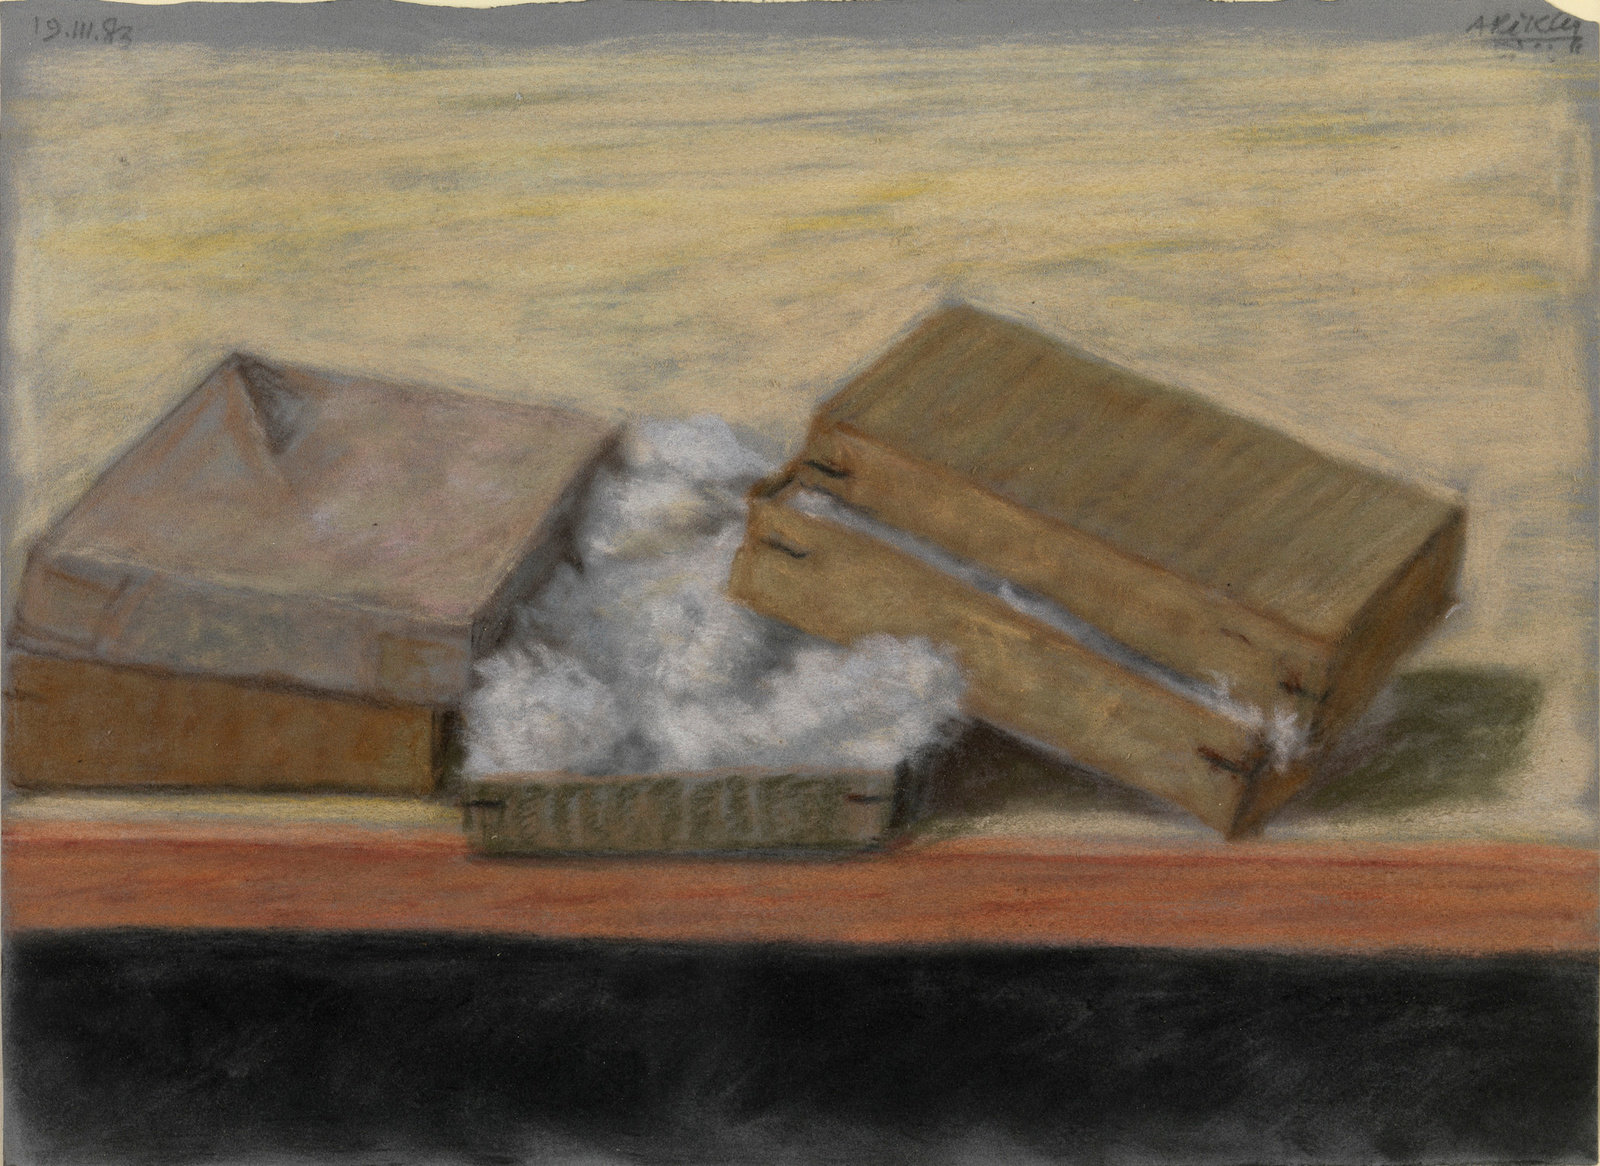 Arikha, pastel boxes, 1983, pastel on paper, 9 1 2 x 12 1 2 in